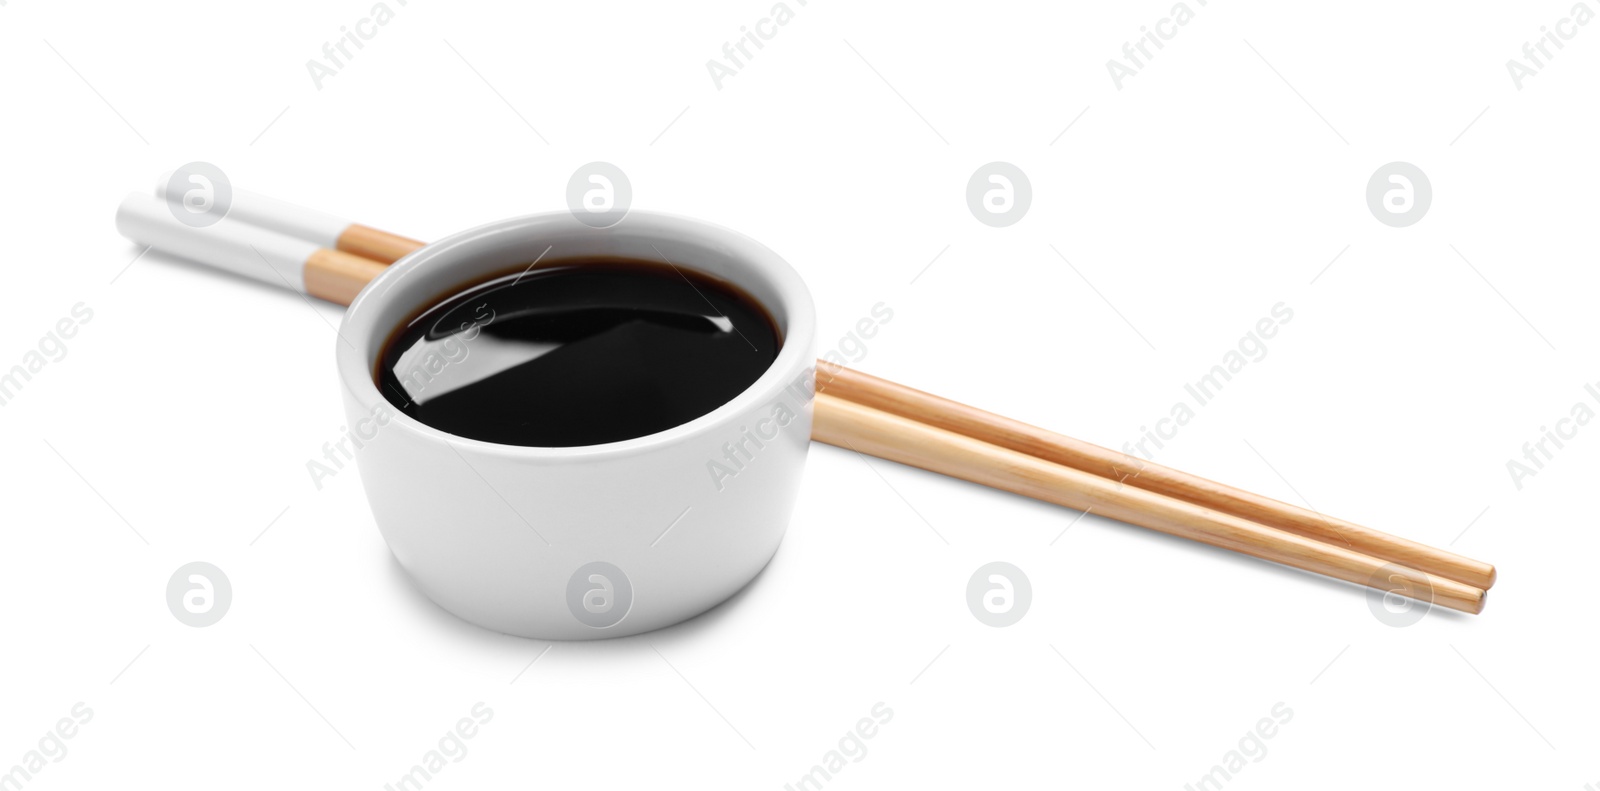 Photo of Soy sauce in bowl and chopsticks on white background